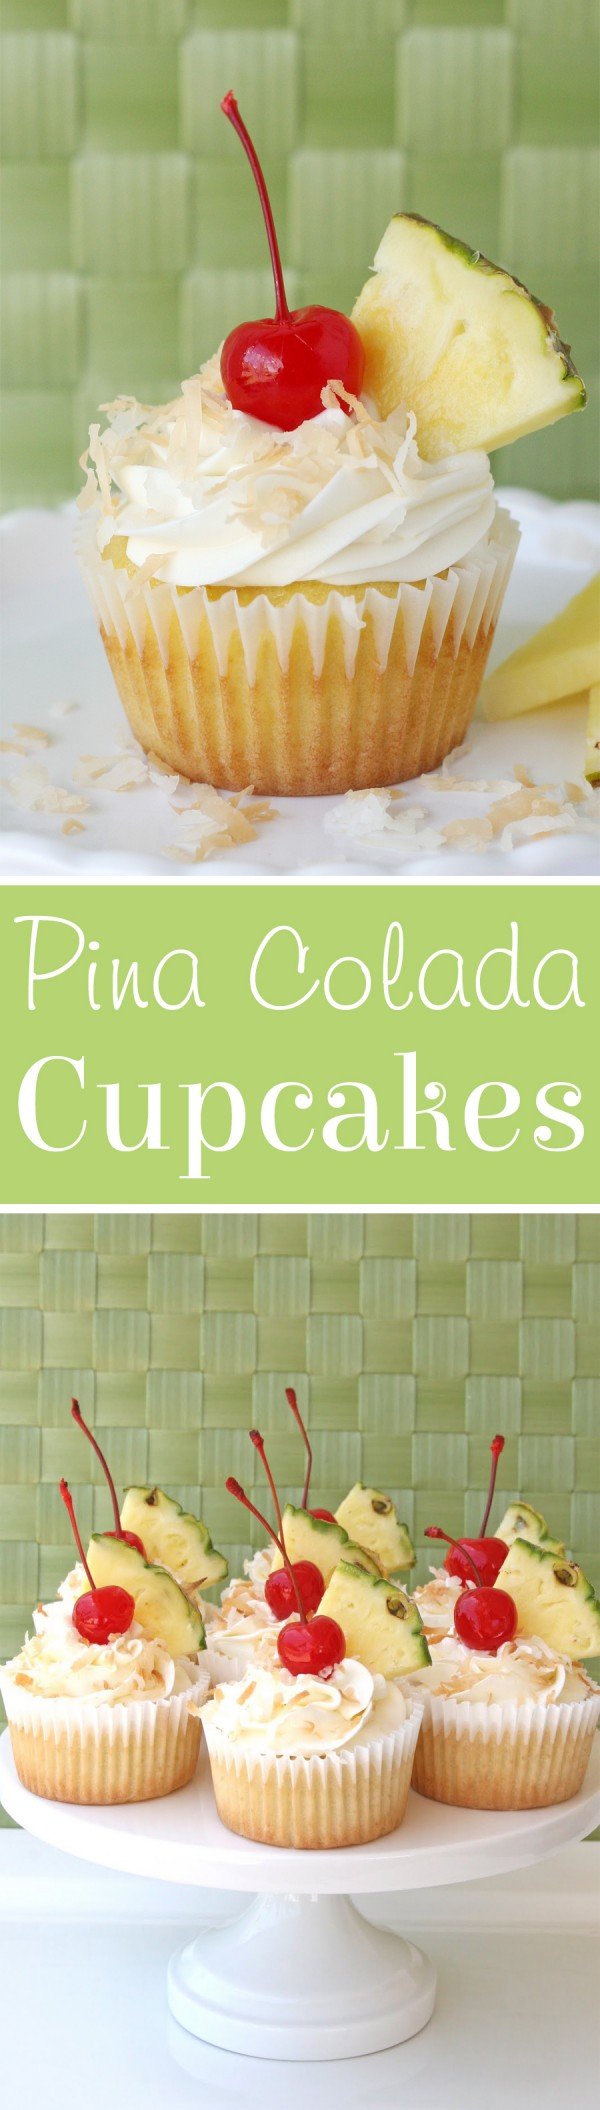 SIMPLY DELICIOUS! Pina Colada Cupcakes (from scratch) 